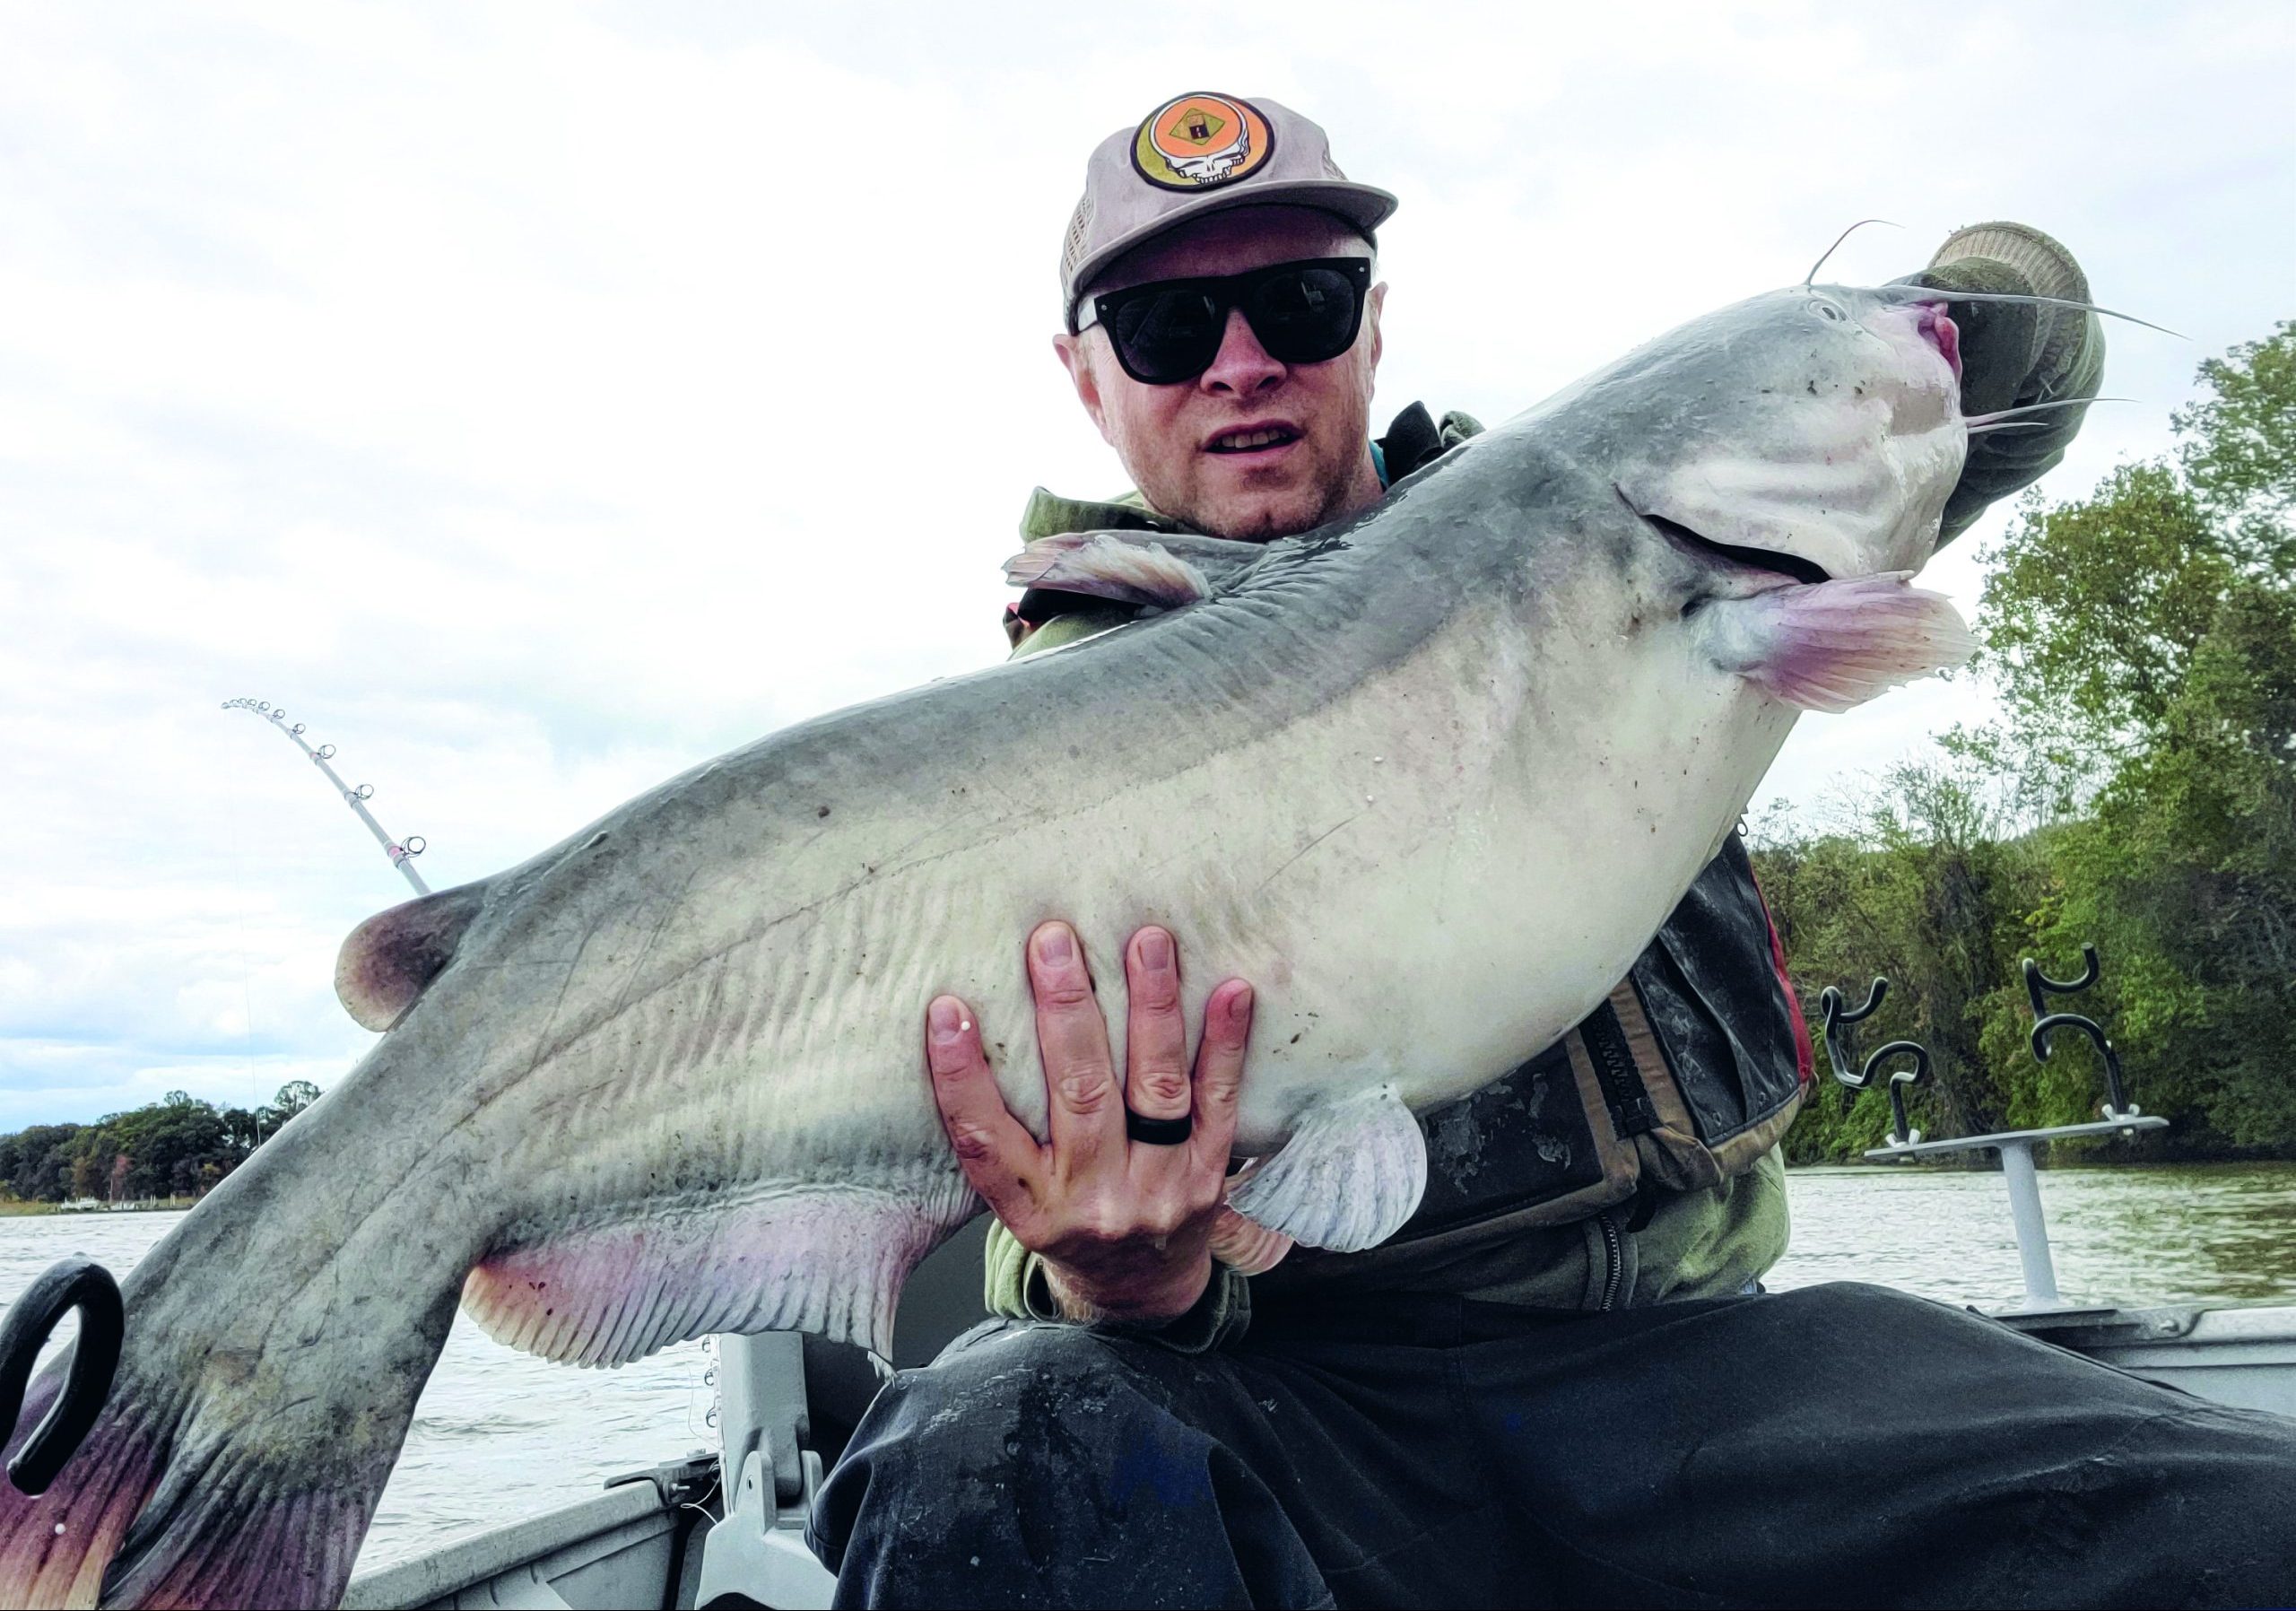 Fly fish angler reels in potential world-record blue catfish in